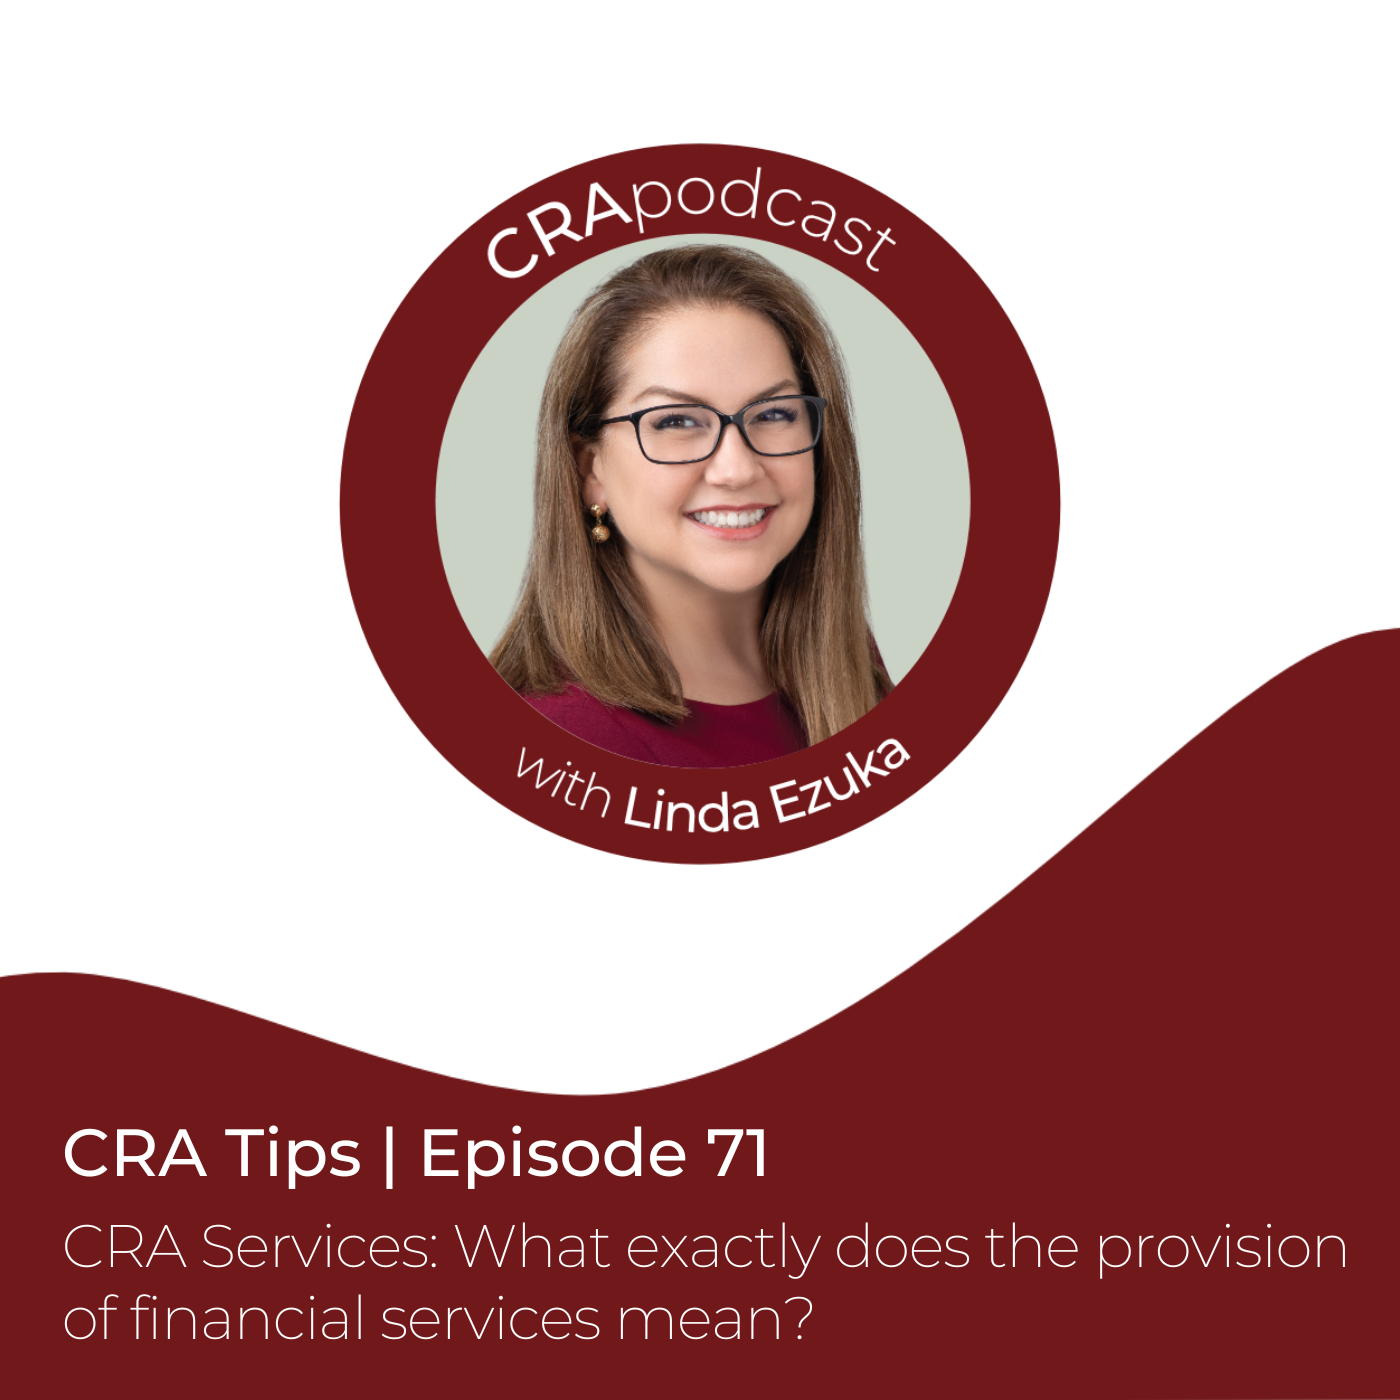 Episode 71: CRA Tips: CRA Services-What exactly does the provision of financial services mean?